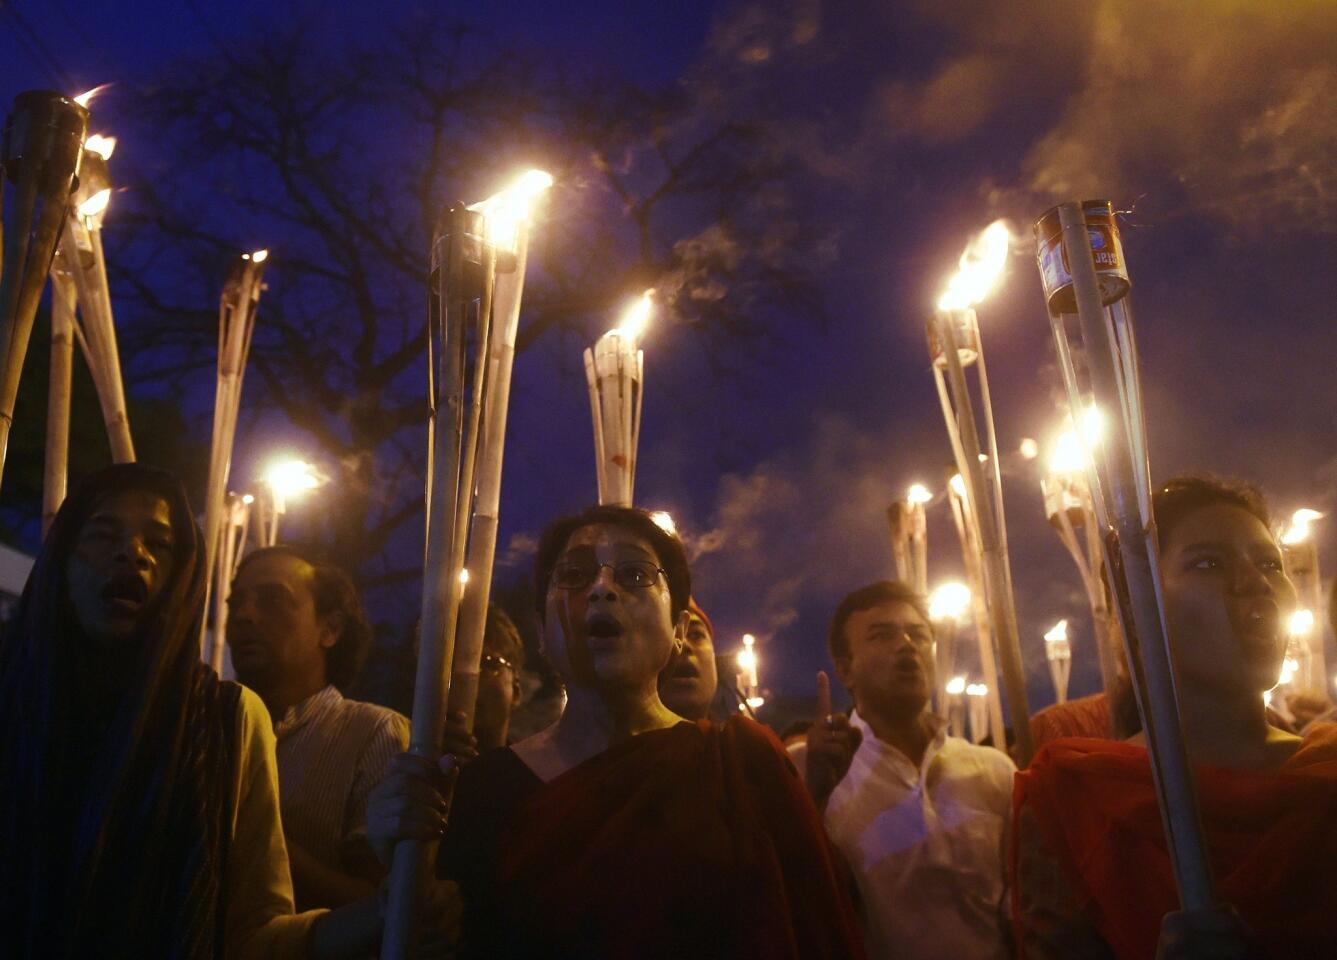 Bangladeshi secular activists take part in a Feb. 27 protest of the killing of Avijit Roy, a U.S. blogger of Bangladeshi origin who was hacked to death by unidentified assailants in Dhaka.